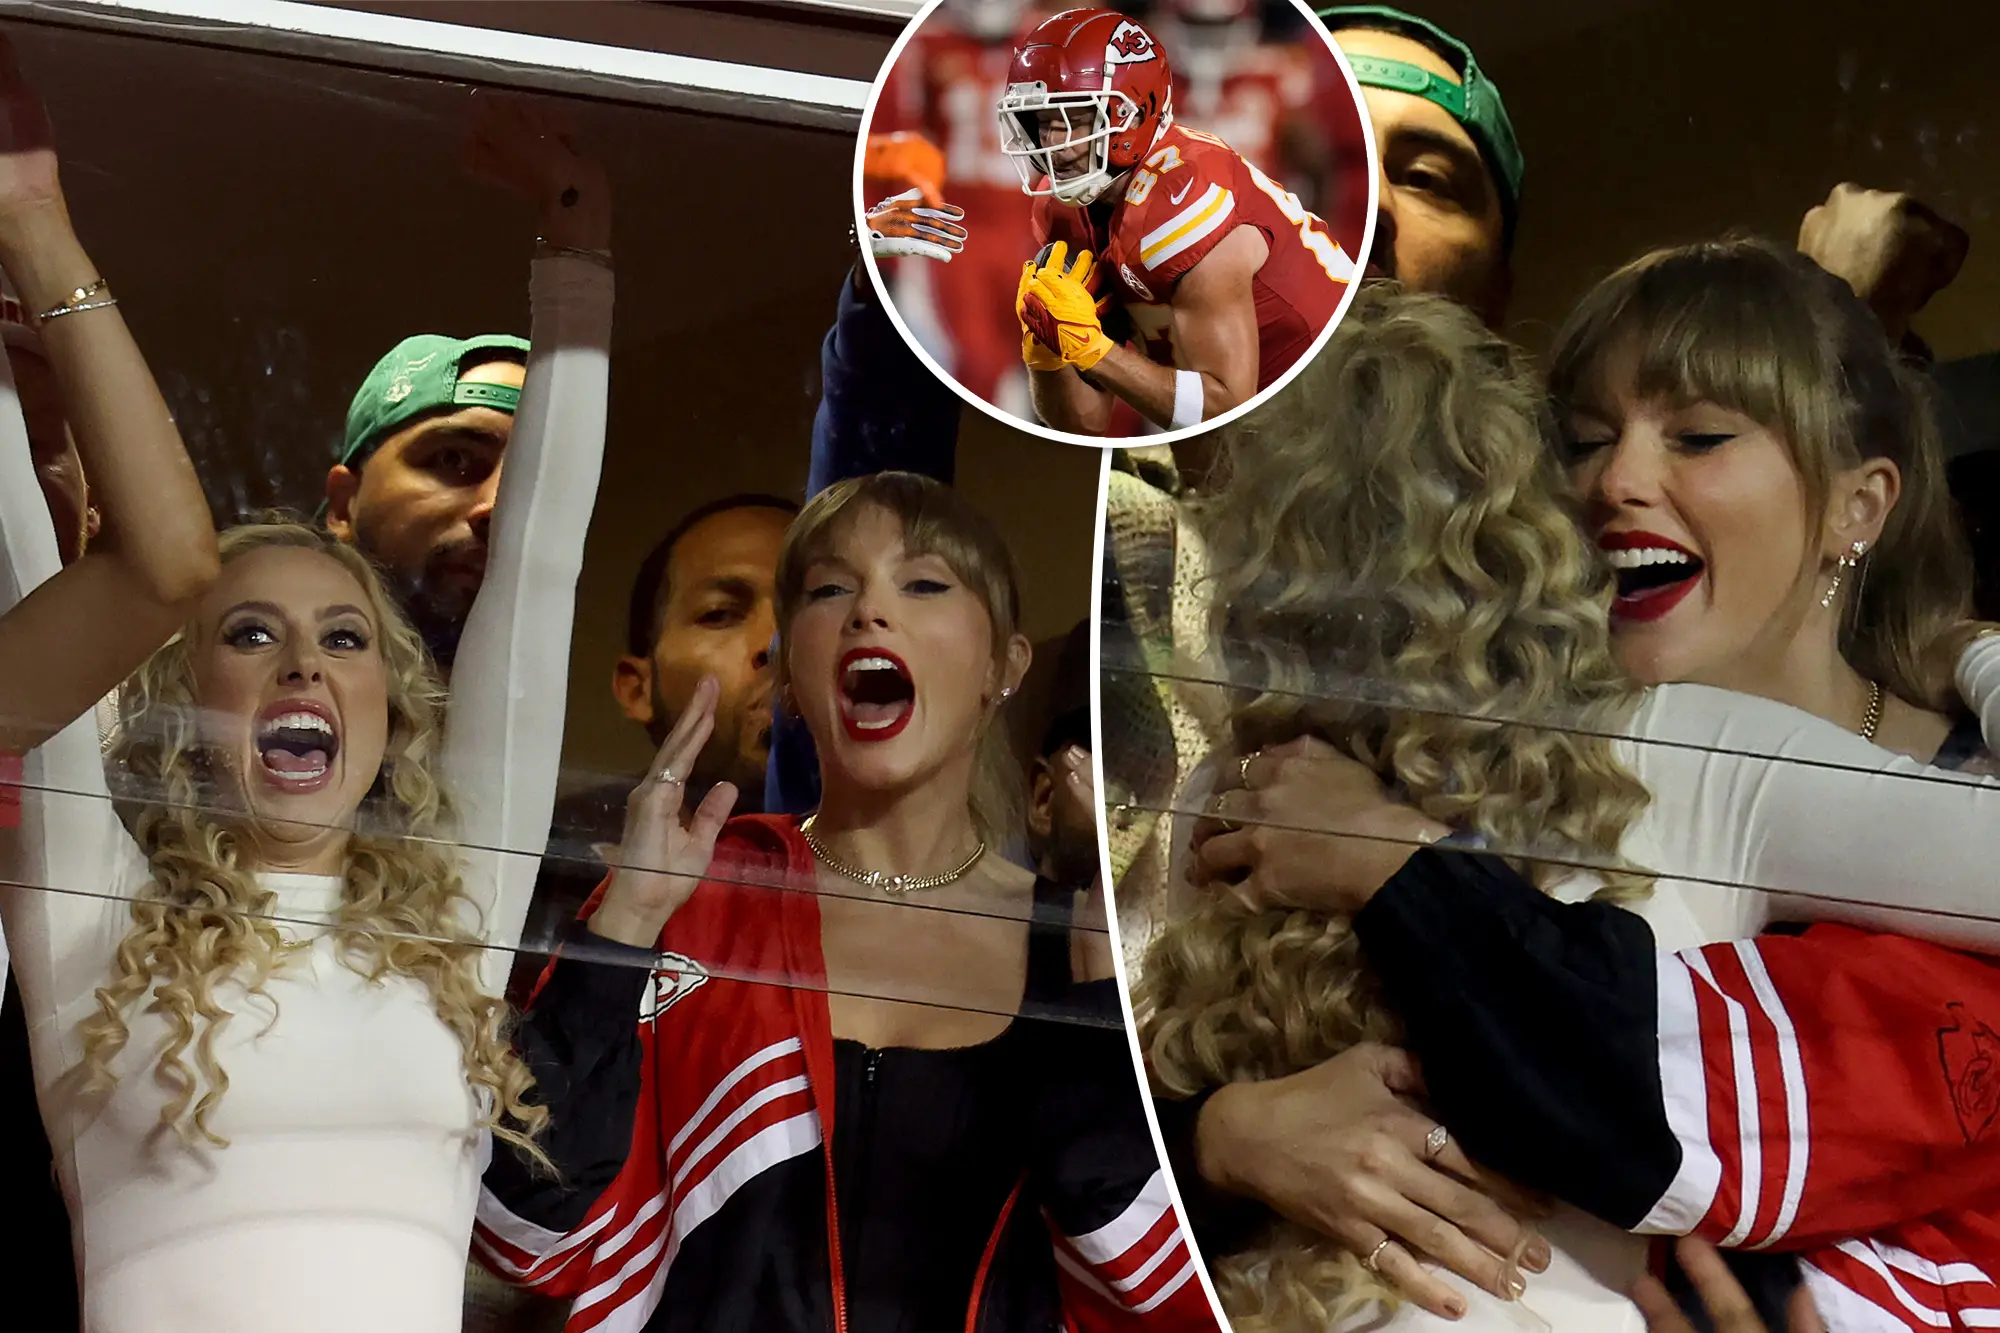 Taylor Swift pleasantly surprised Brittany Mahomes with heartfelt gifts after she confirmed her third pregnancy with her husband.